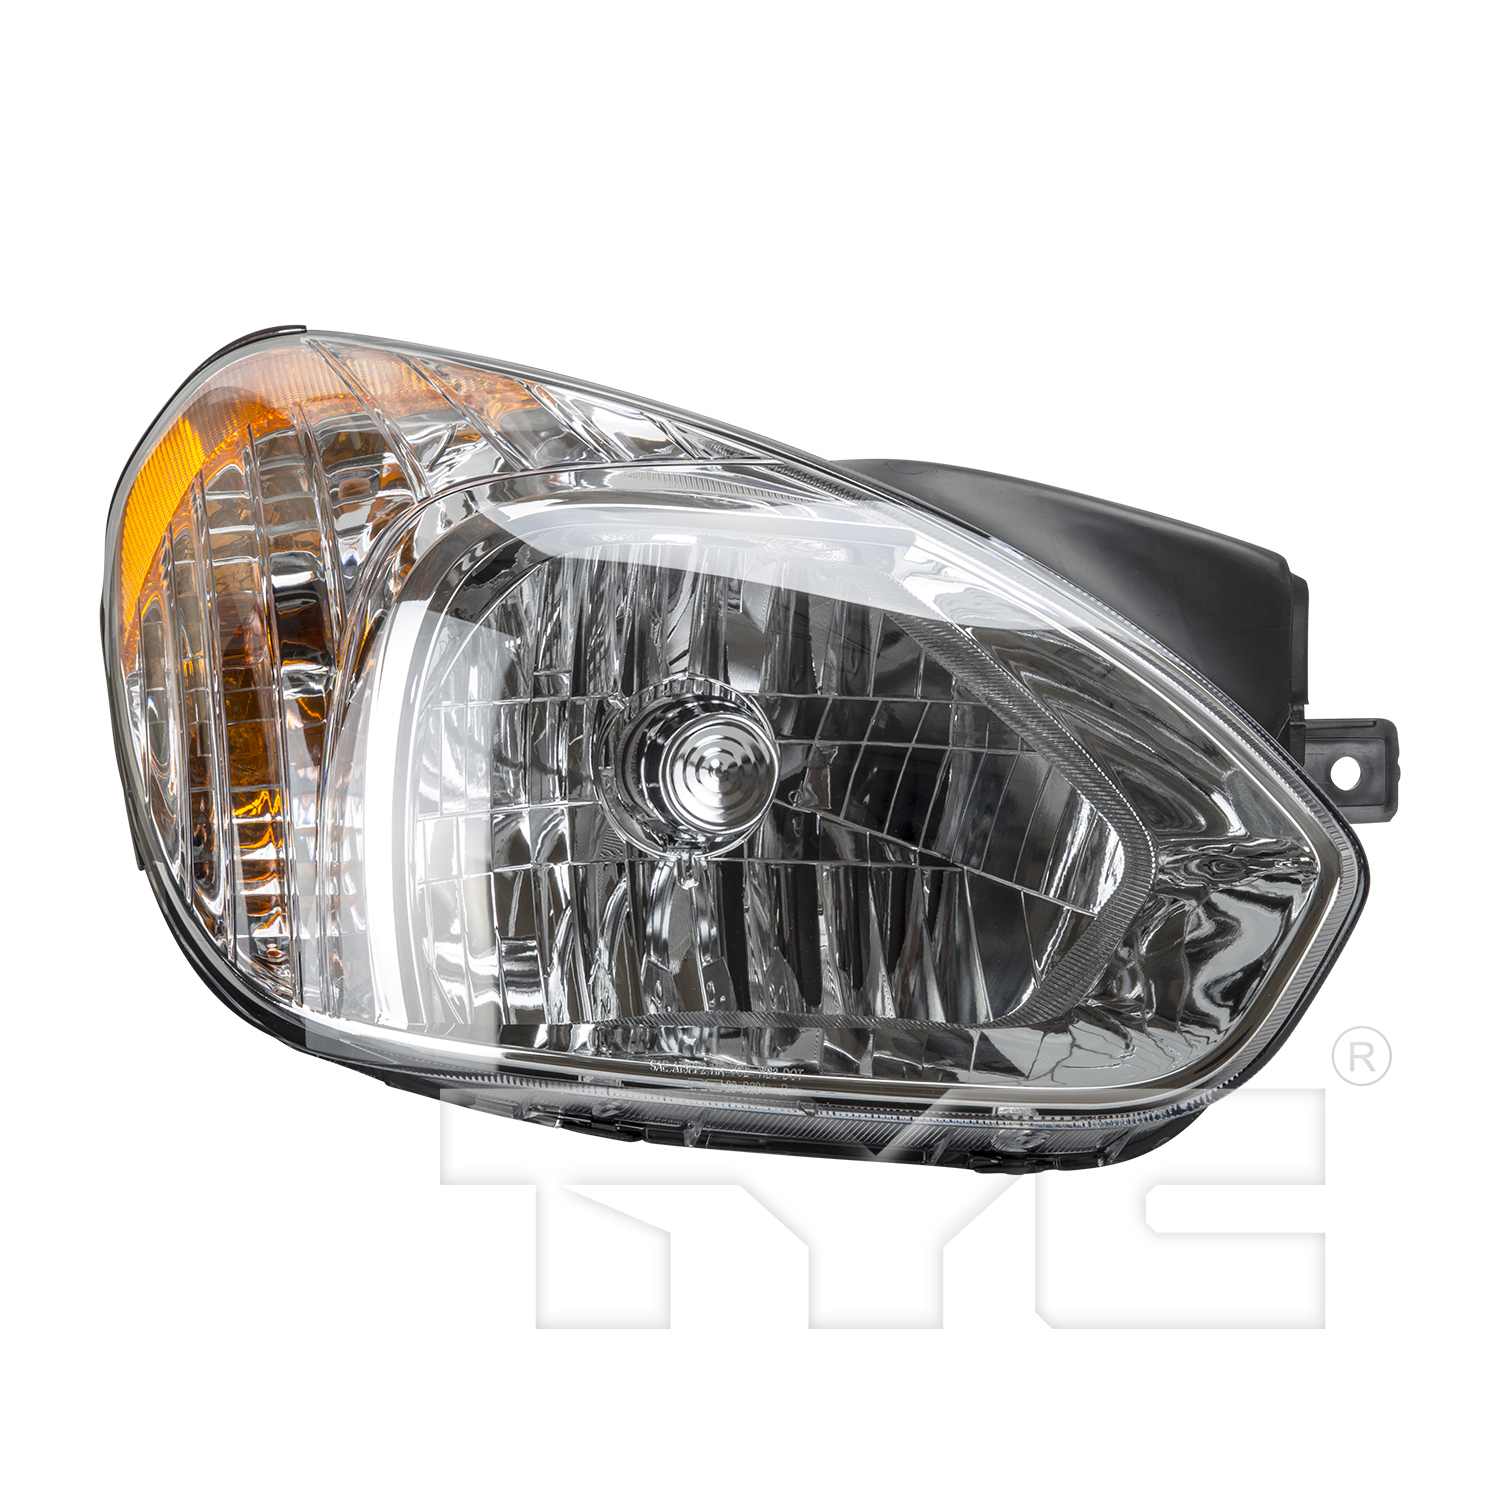 Aftermarket HEADLIGHTS for HYUNDAI - ACCENT, ACCENT,07-11,RT Headlamp assy composite